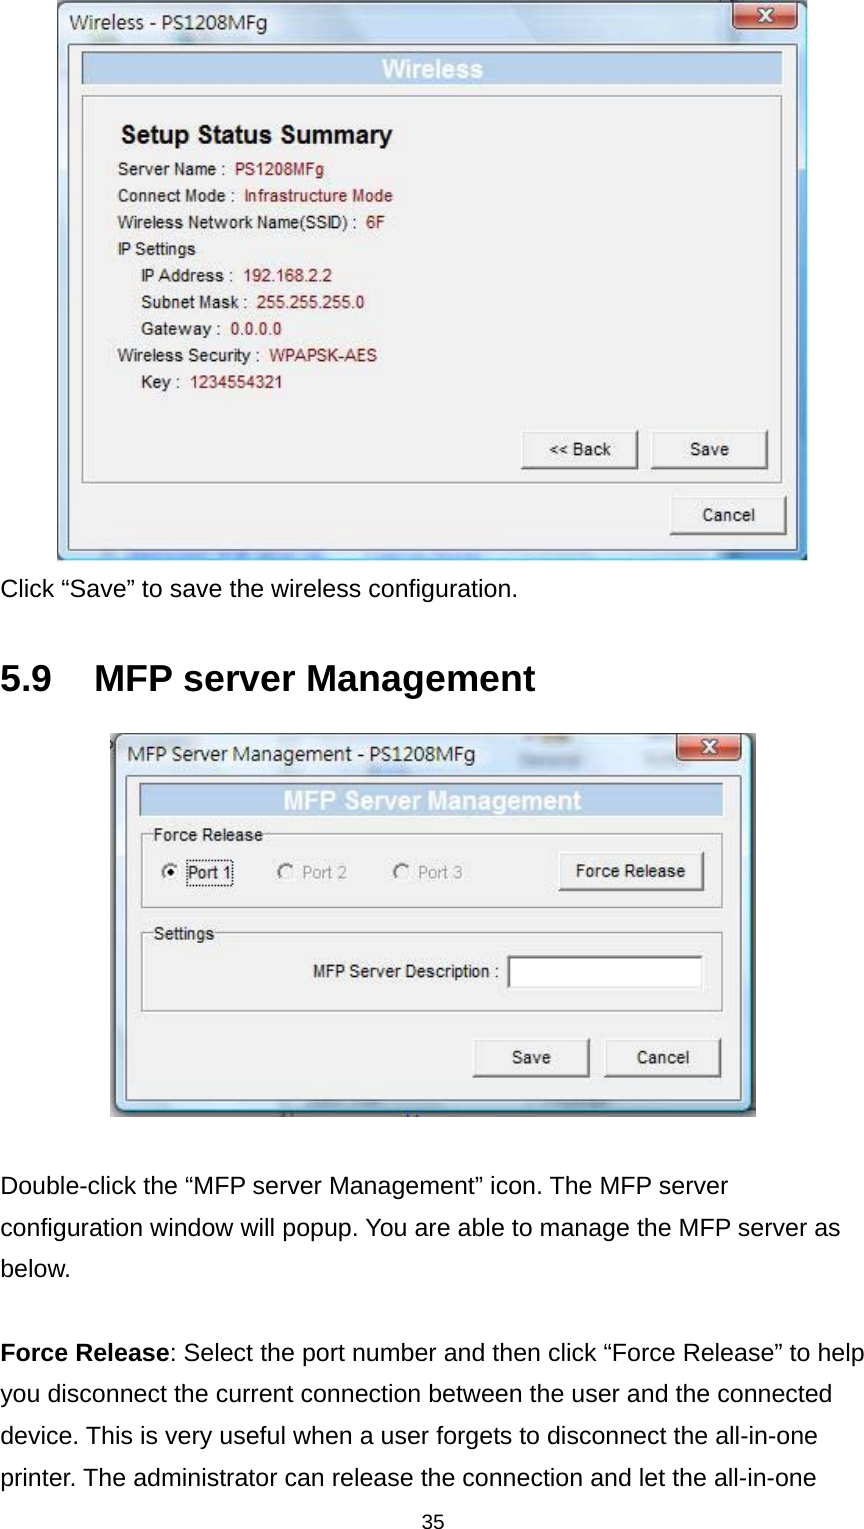 35   Click “Save” to save the wireless configuration.  5.9 MFP server Management   Double-click the “MFP server Management” icon. The MFP server configuration window will popup. You are able to manage the MFP server as below.  Force Release: Select the port number and then click “Force Release” to help you disconnect the current connection between the user and the connected device. This is very useful when a user forgets to disconnect the all-in-one printer. The administrator can release the connection and let the all-in-one 